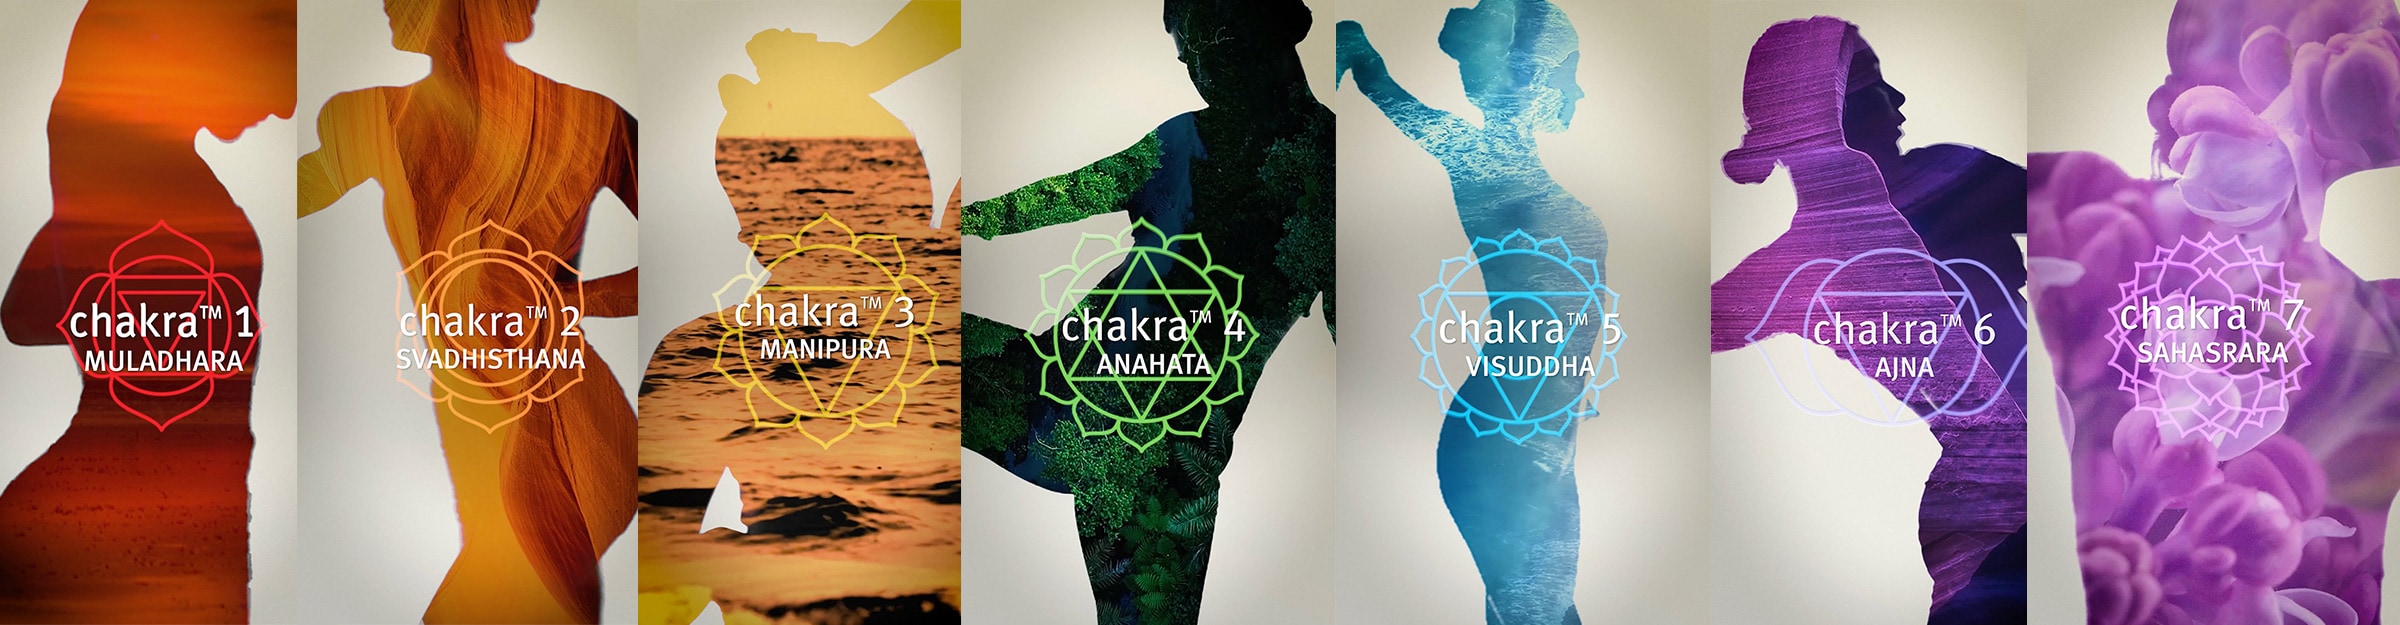 Discover more about chakras